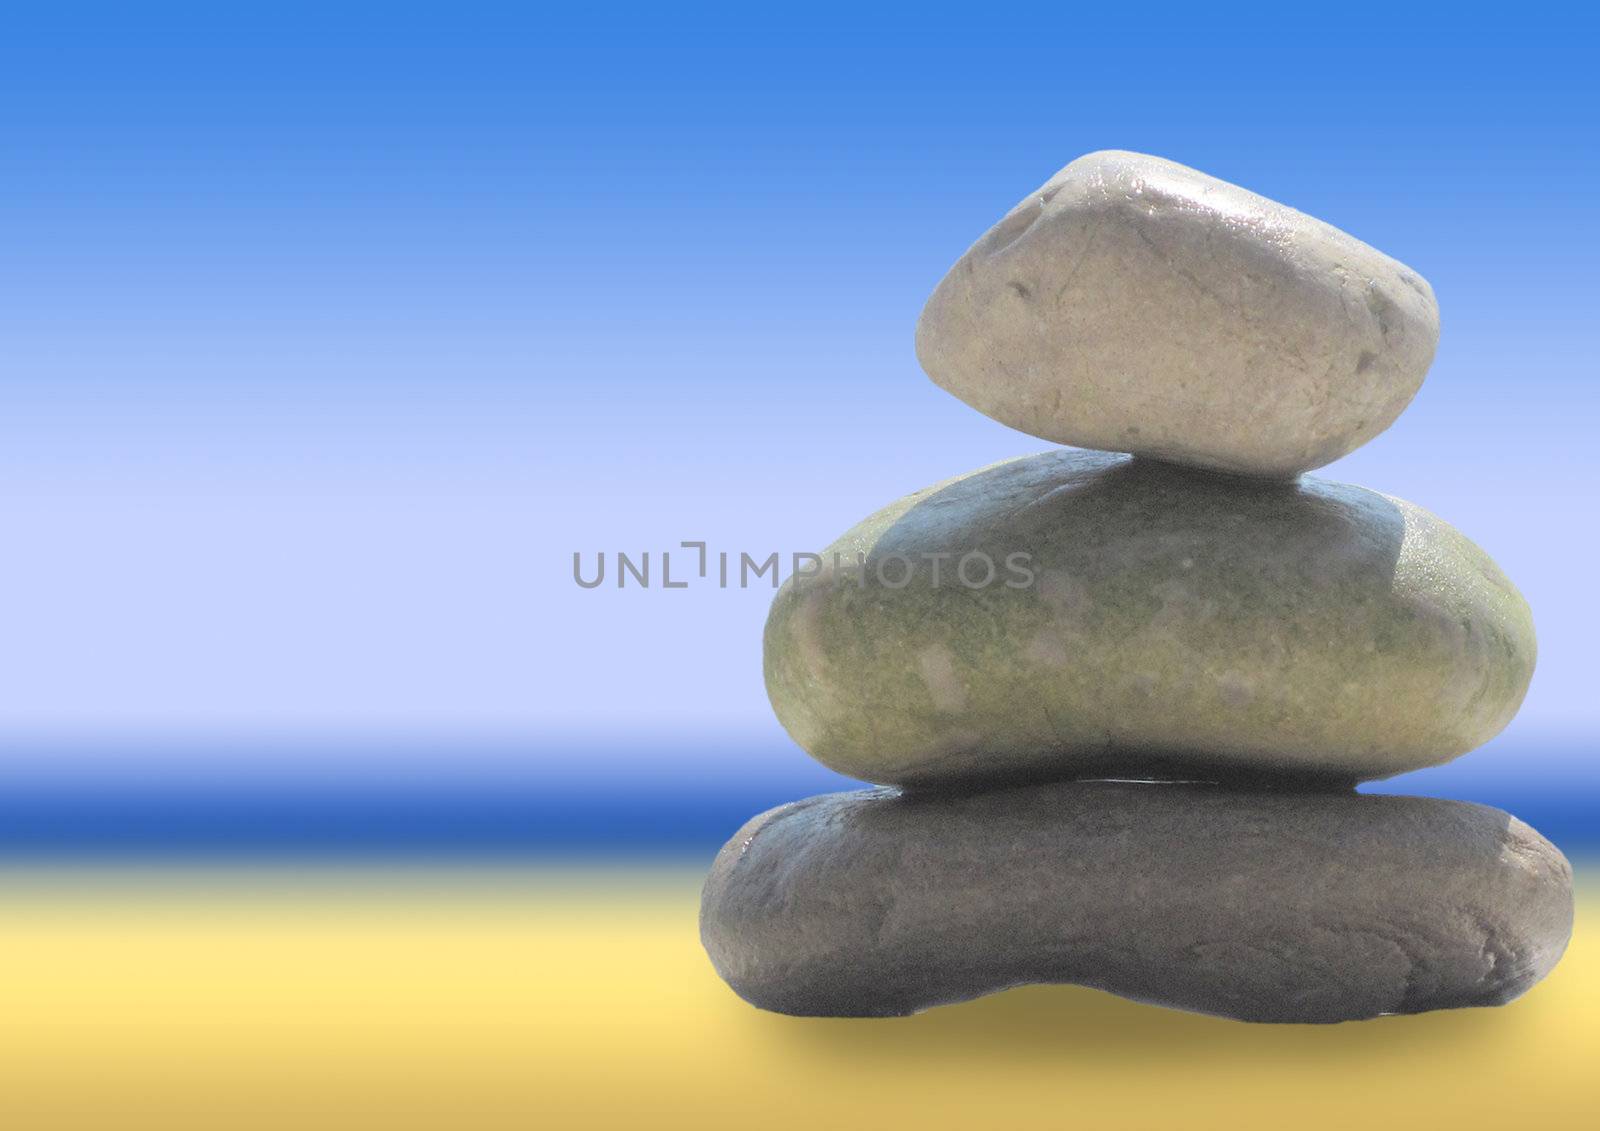 The stack of pebble stones in zen concept  by svtrotof